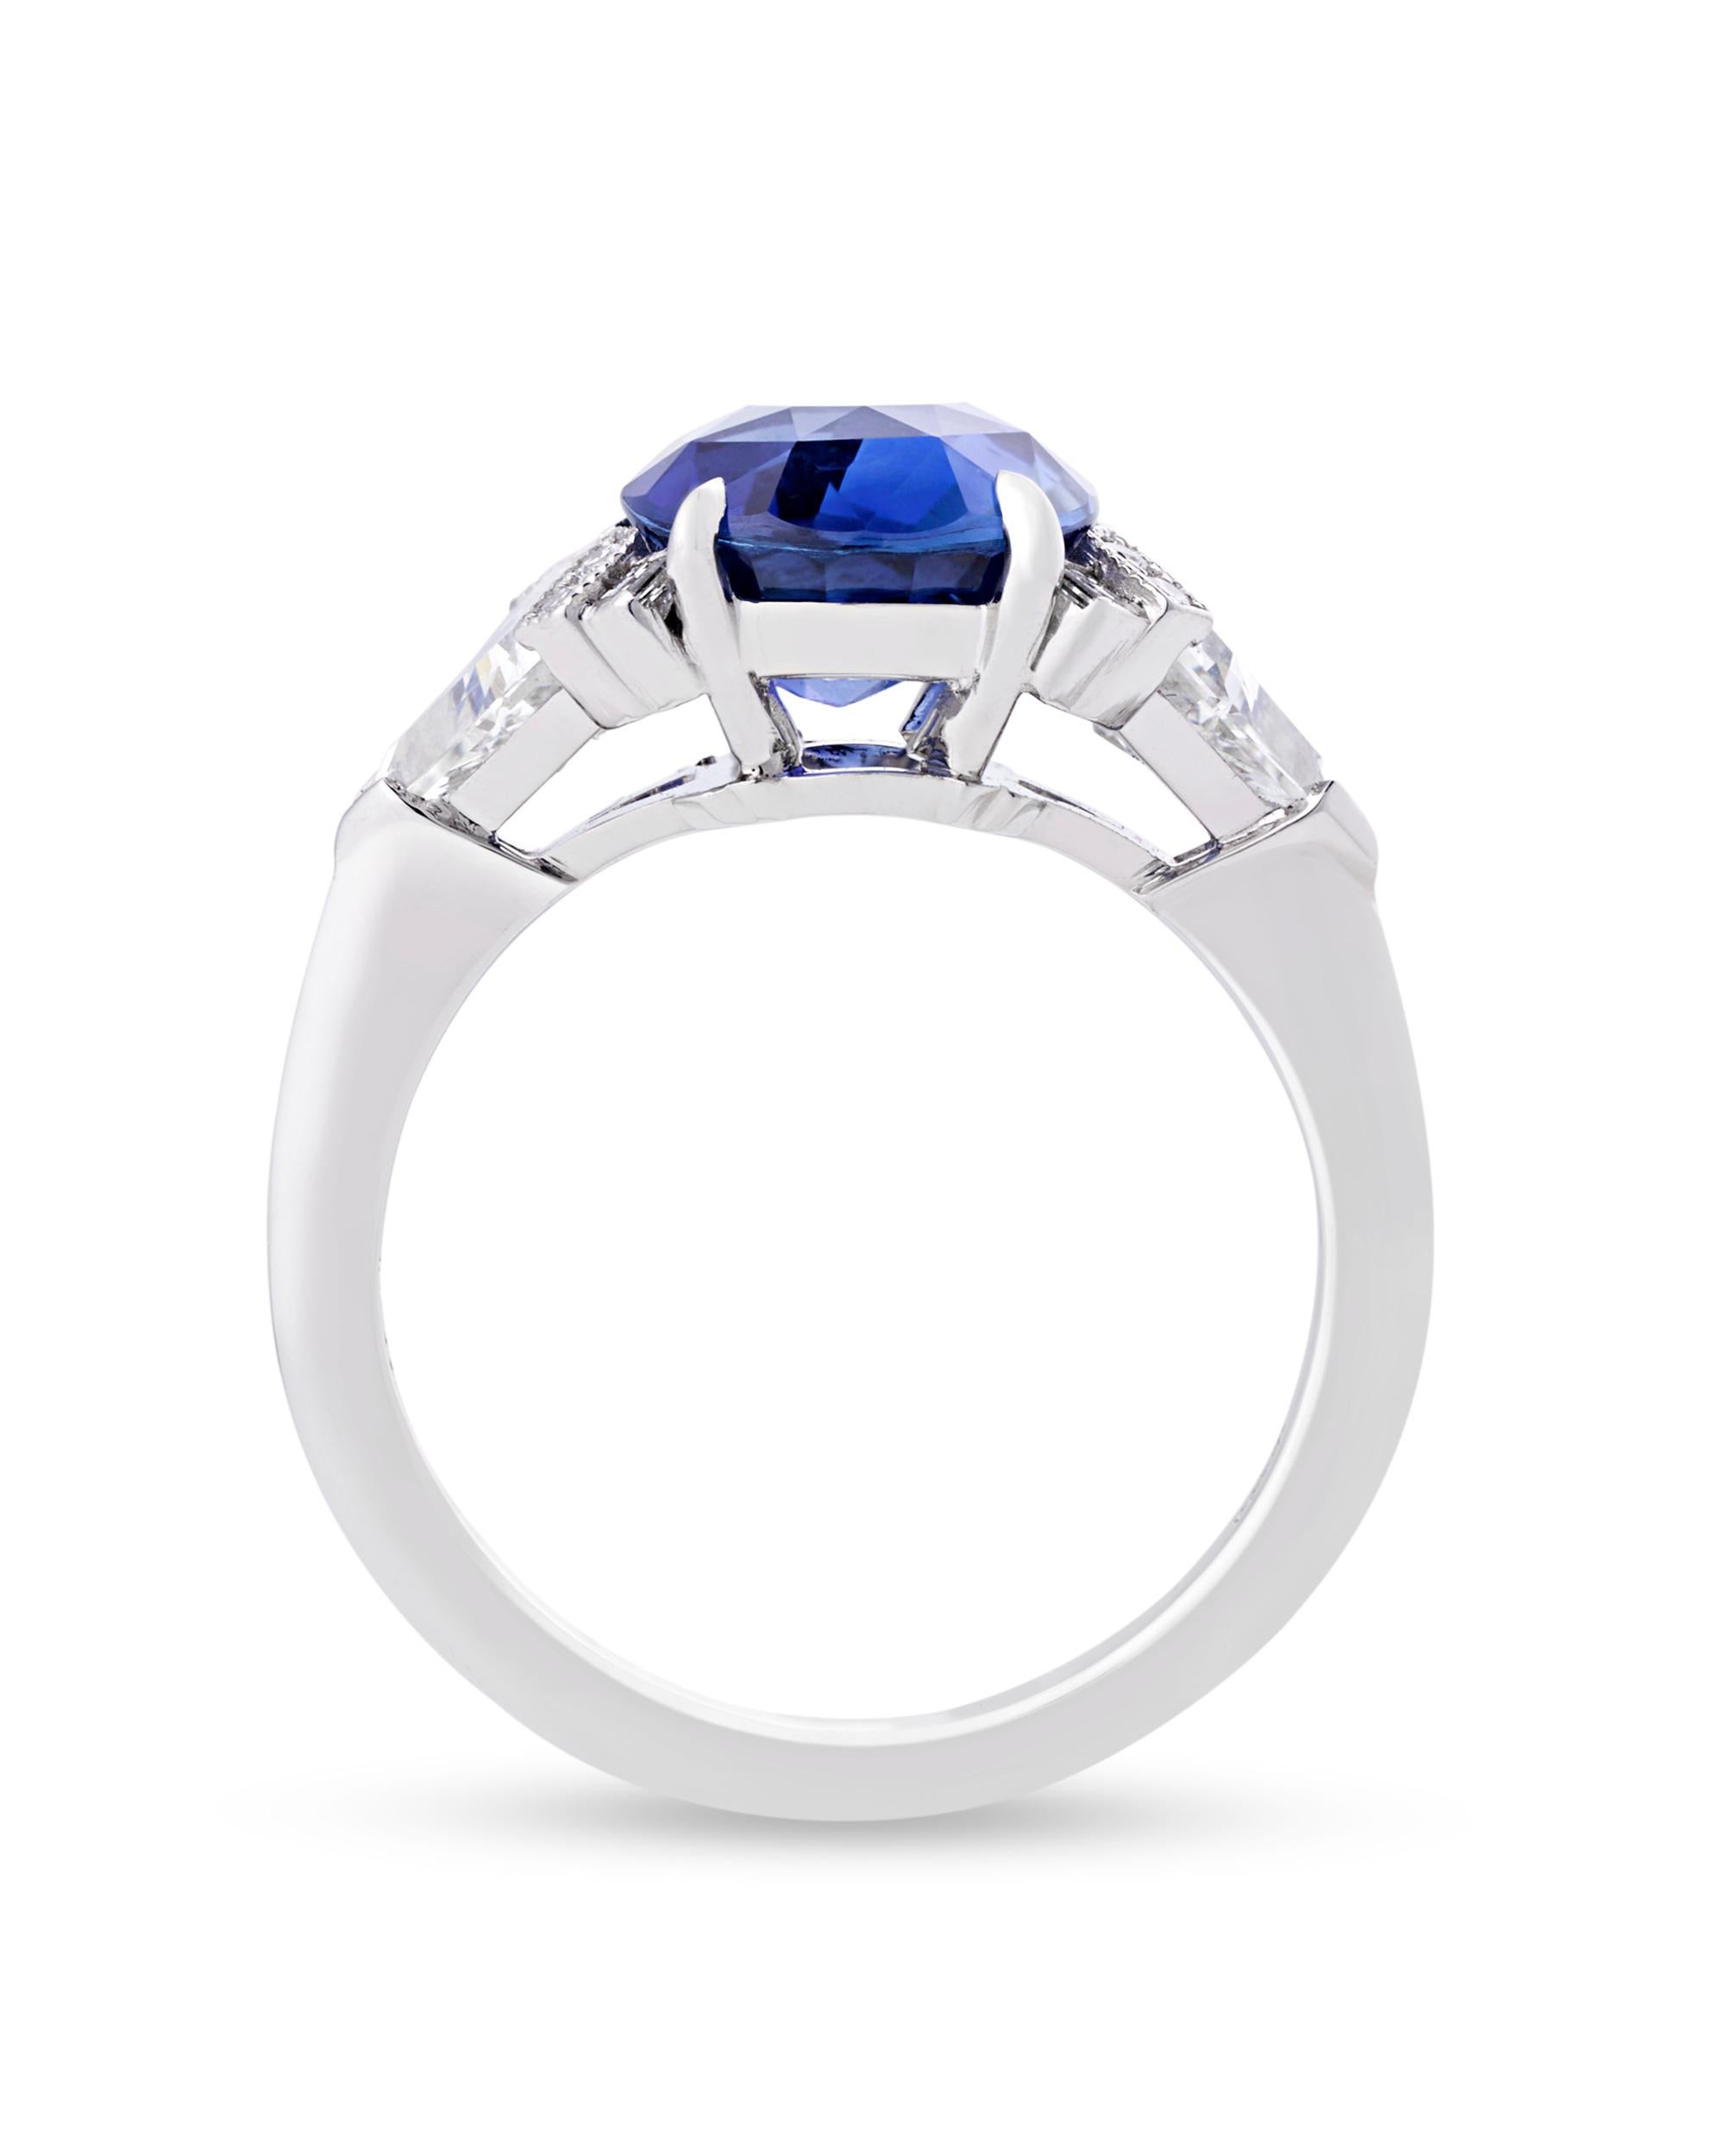 An untreated oval sapphire weighing 4.07 carats is set in this classic Art Deco-style ring from Raymond Yard. The stone is certified by the Gemological Institute of America and GemResearch SwissLab as being untreated, meaning its lovely blue hue is